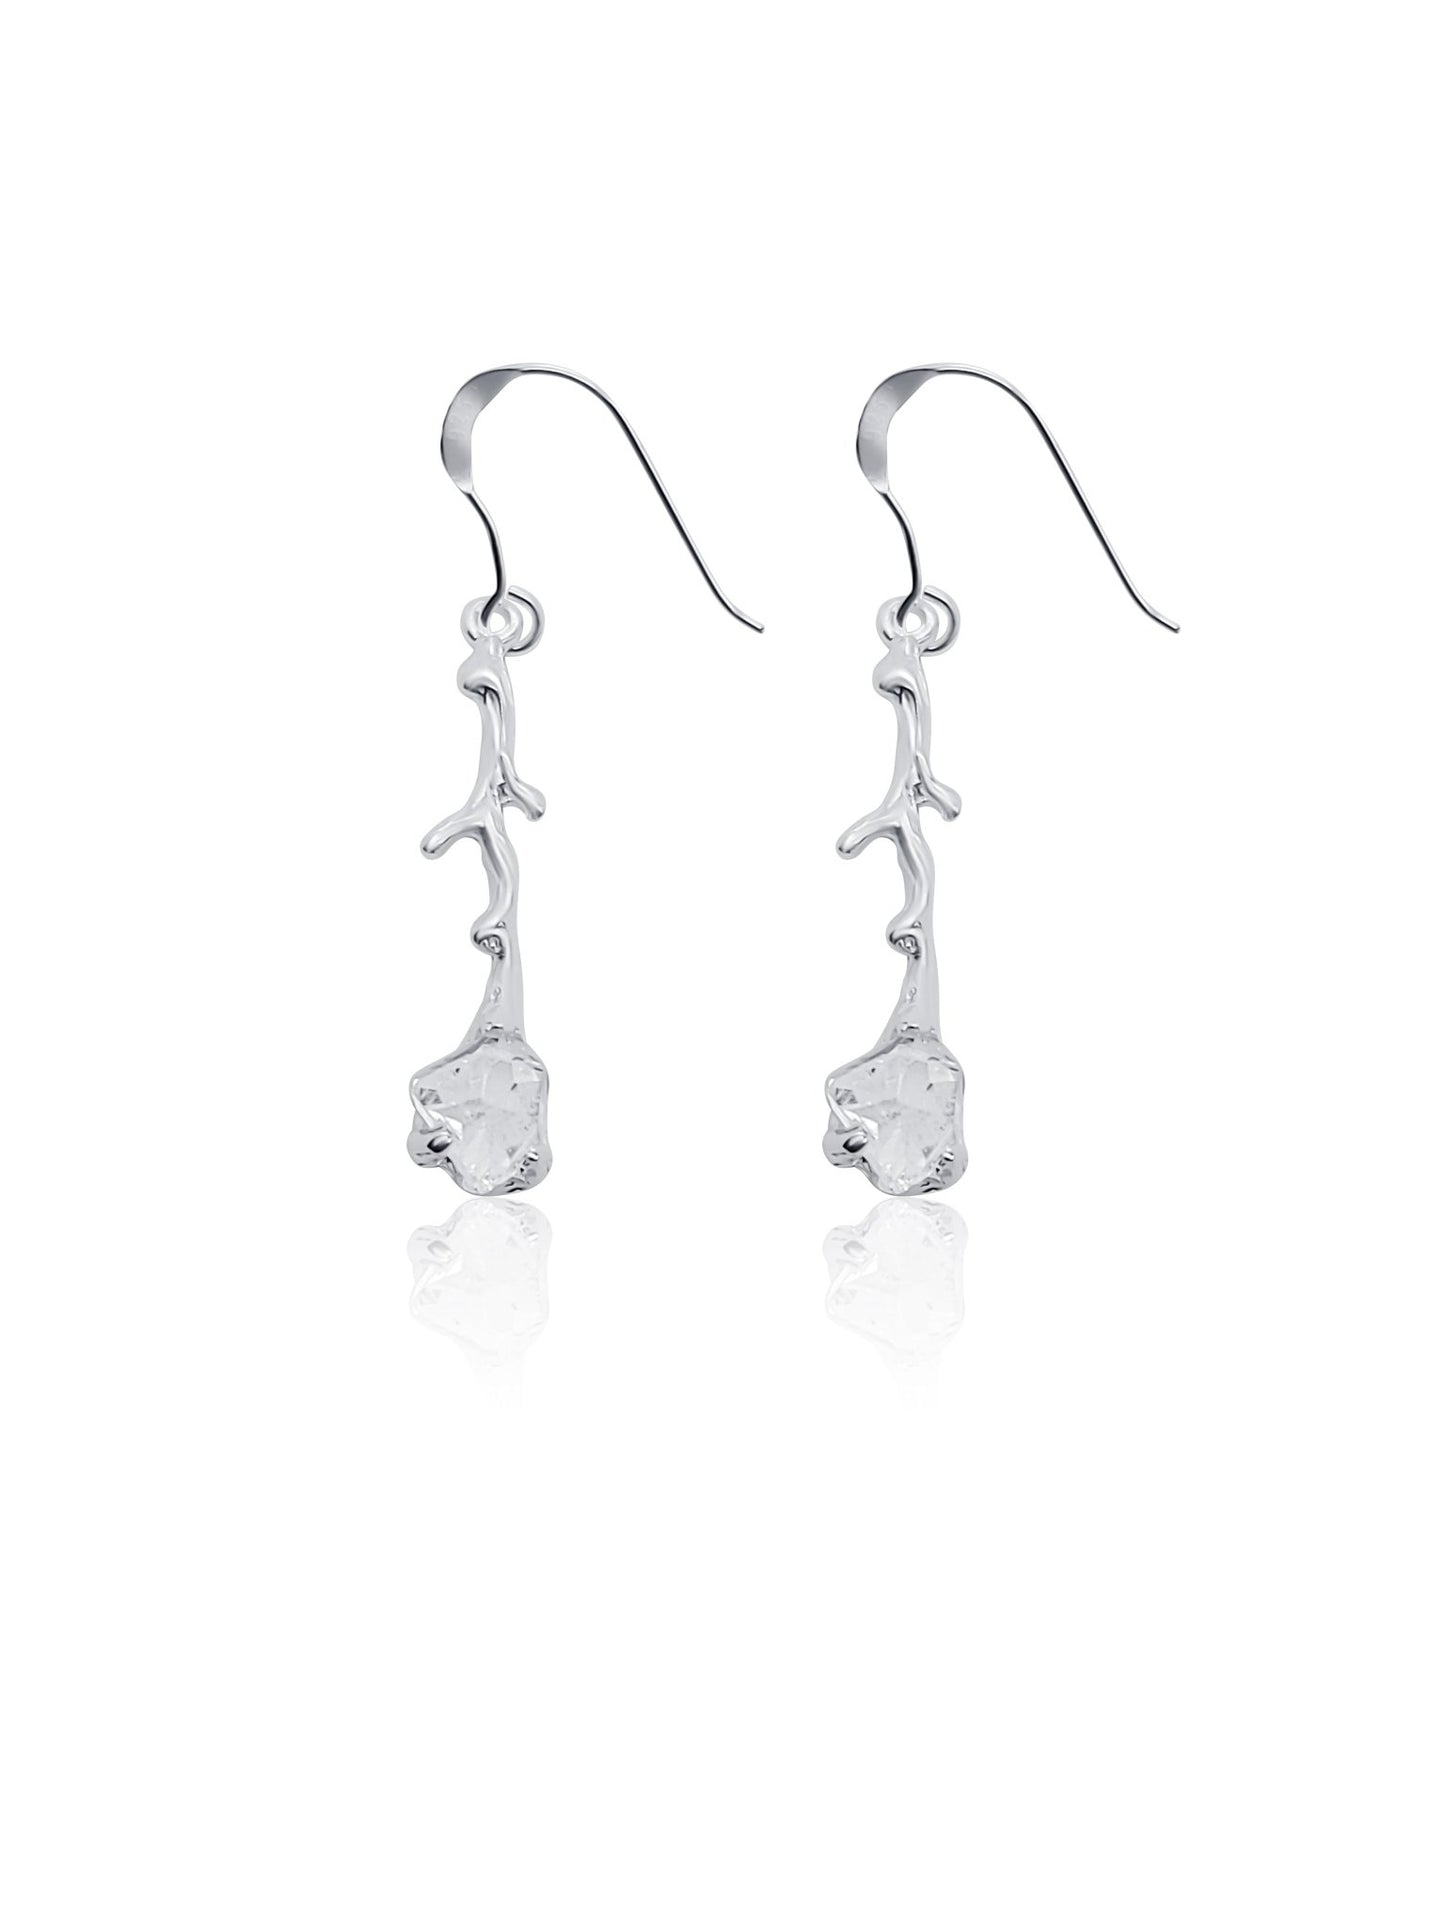 Herkimer diamond silver branch earrings on french ear wires